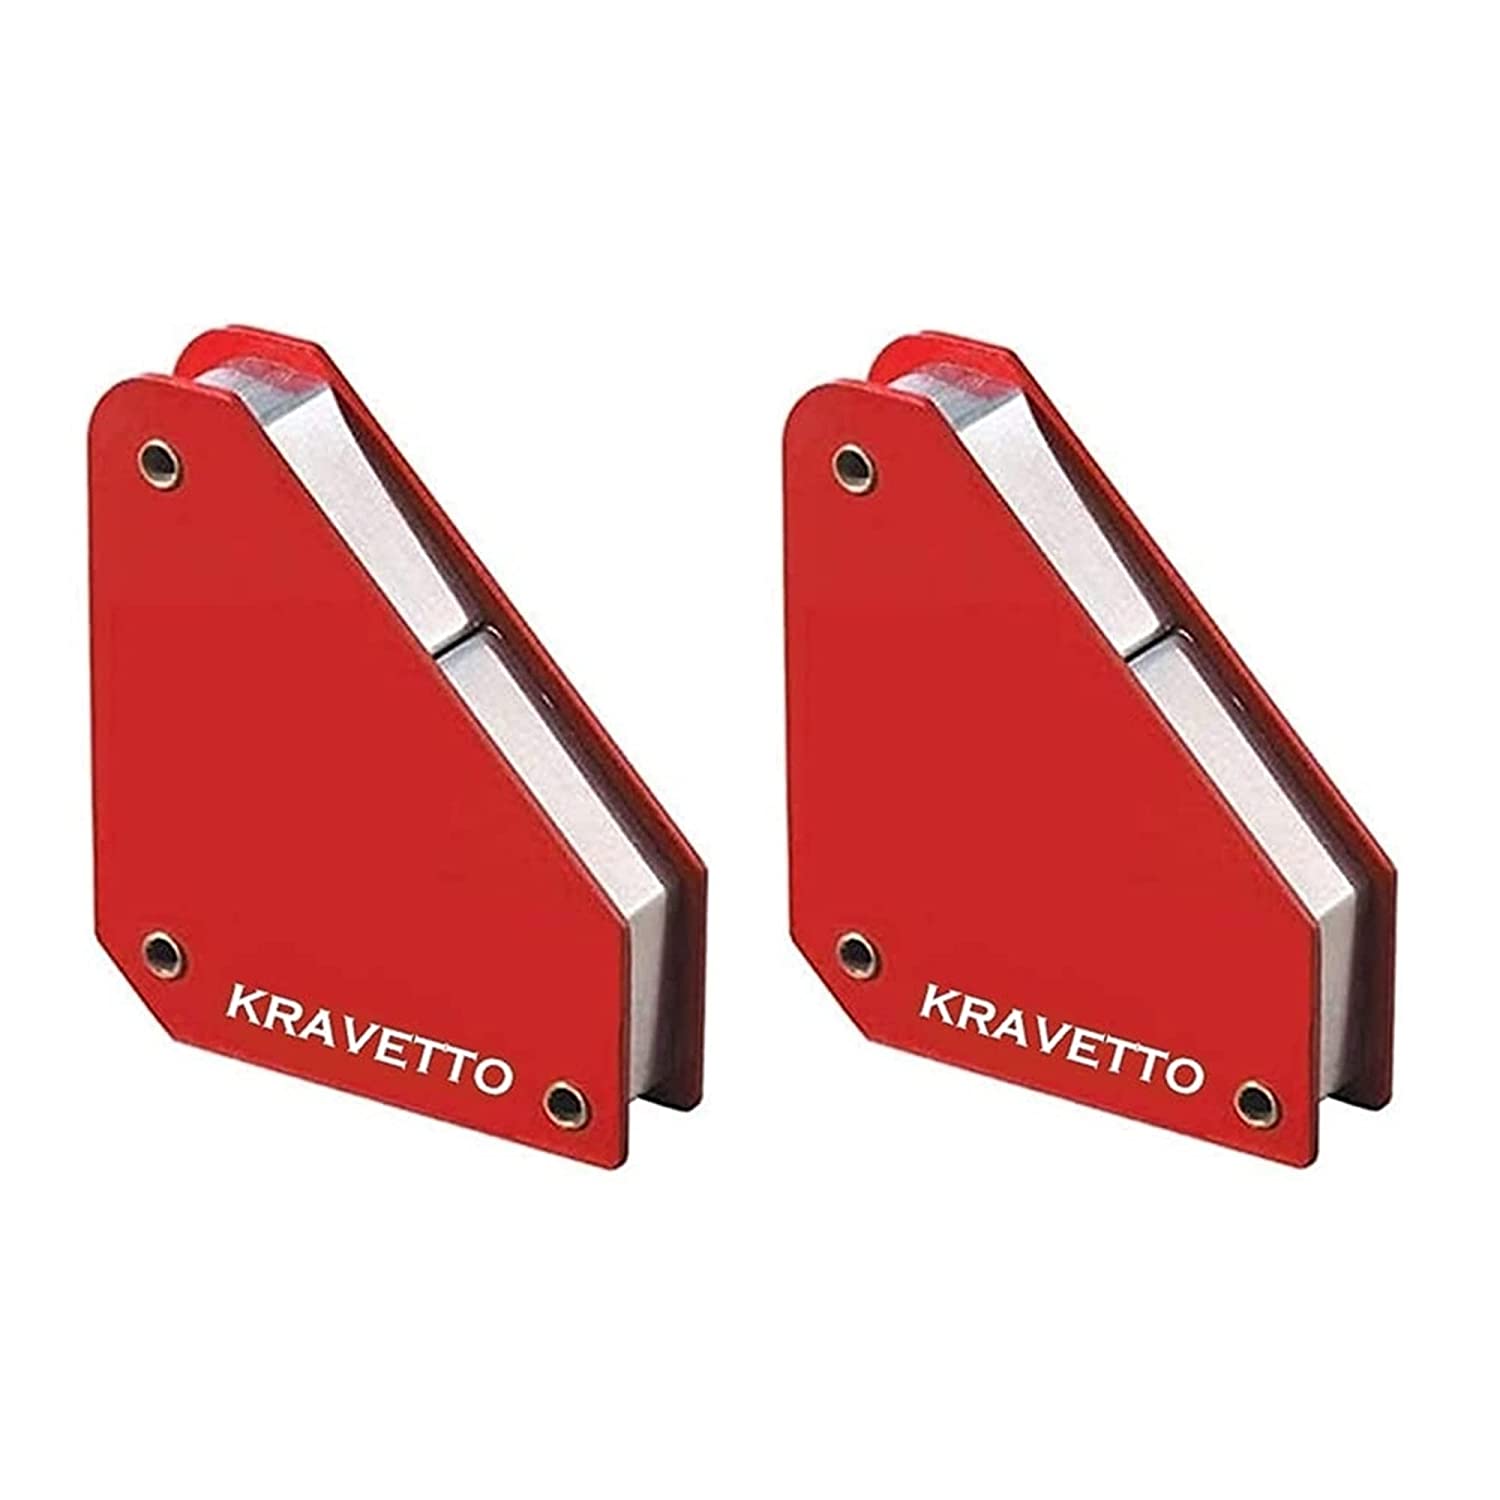 Kravetto Square Magnetic Clamp with Safety Shield 110 x 95mm (Pack of 2)